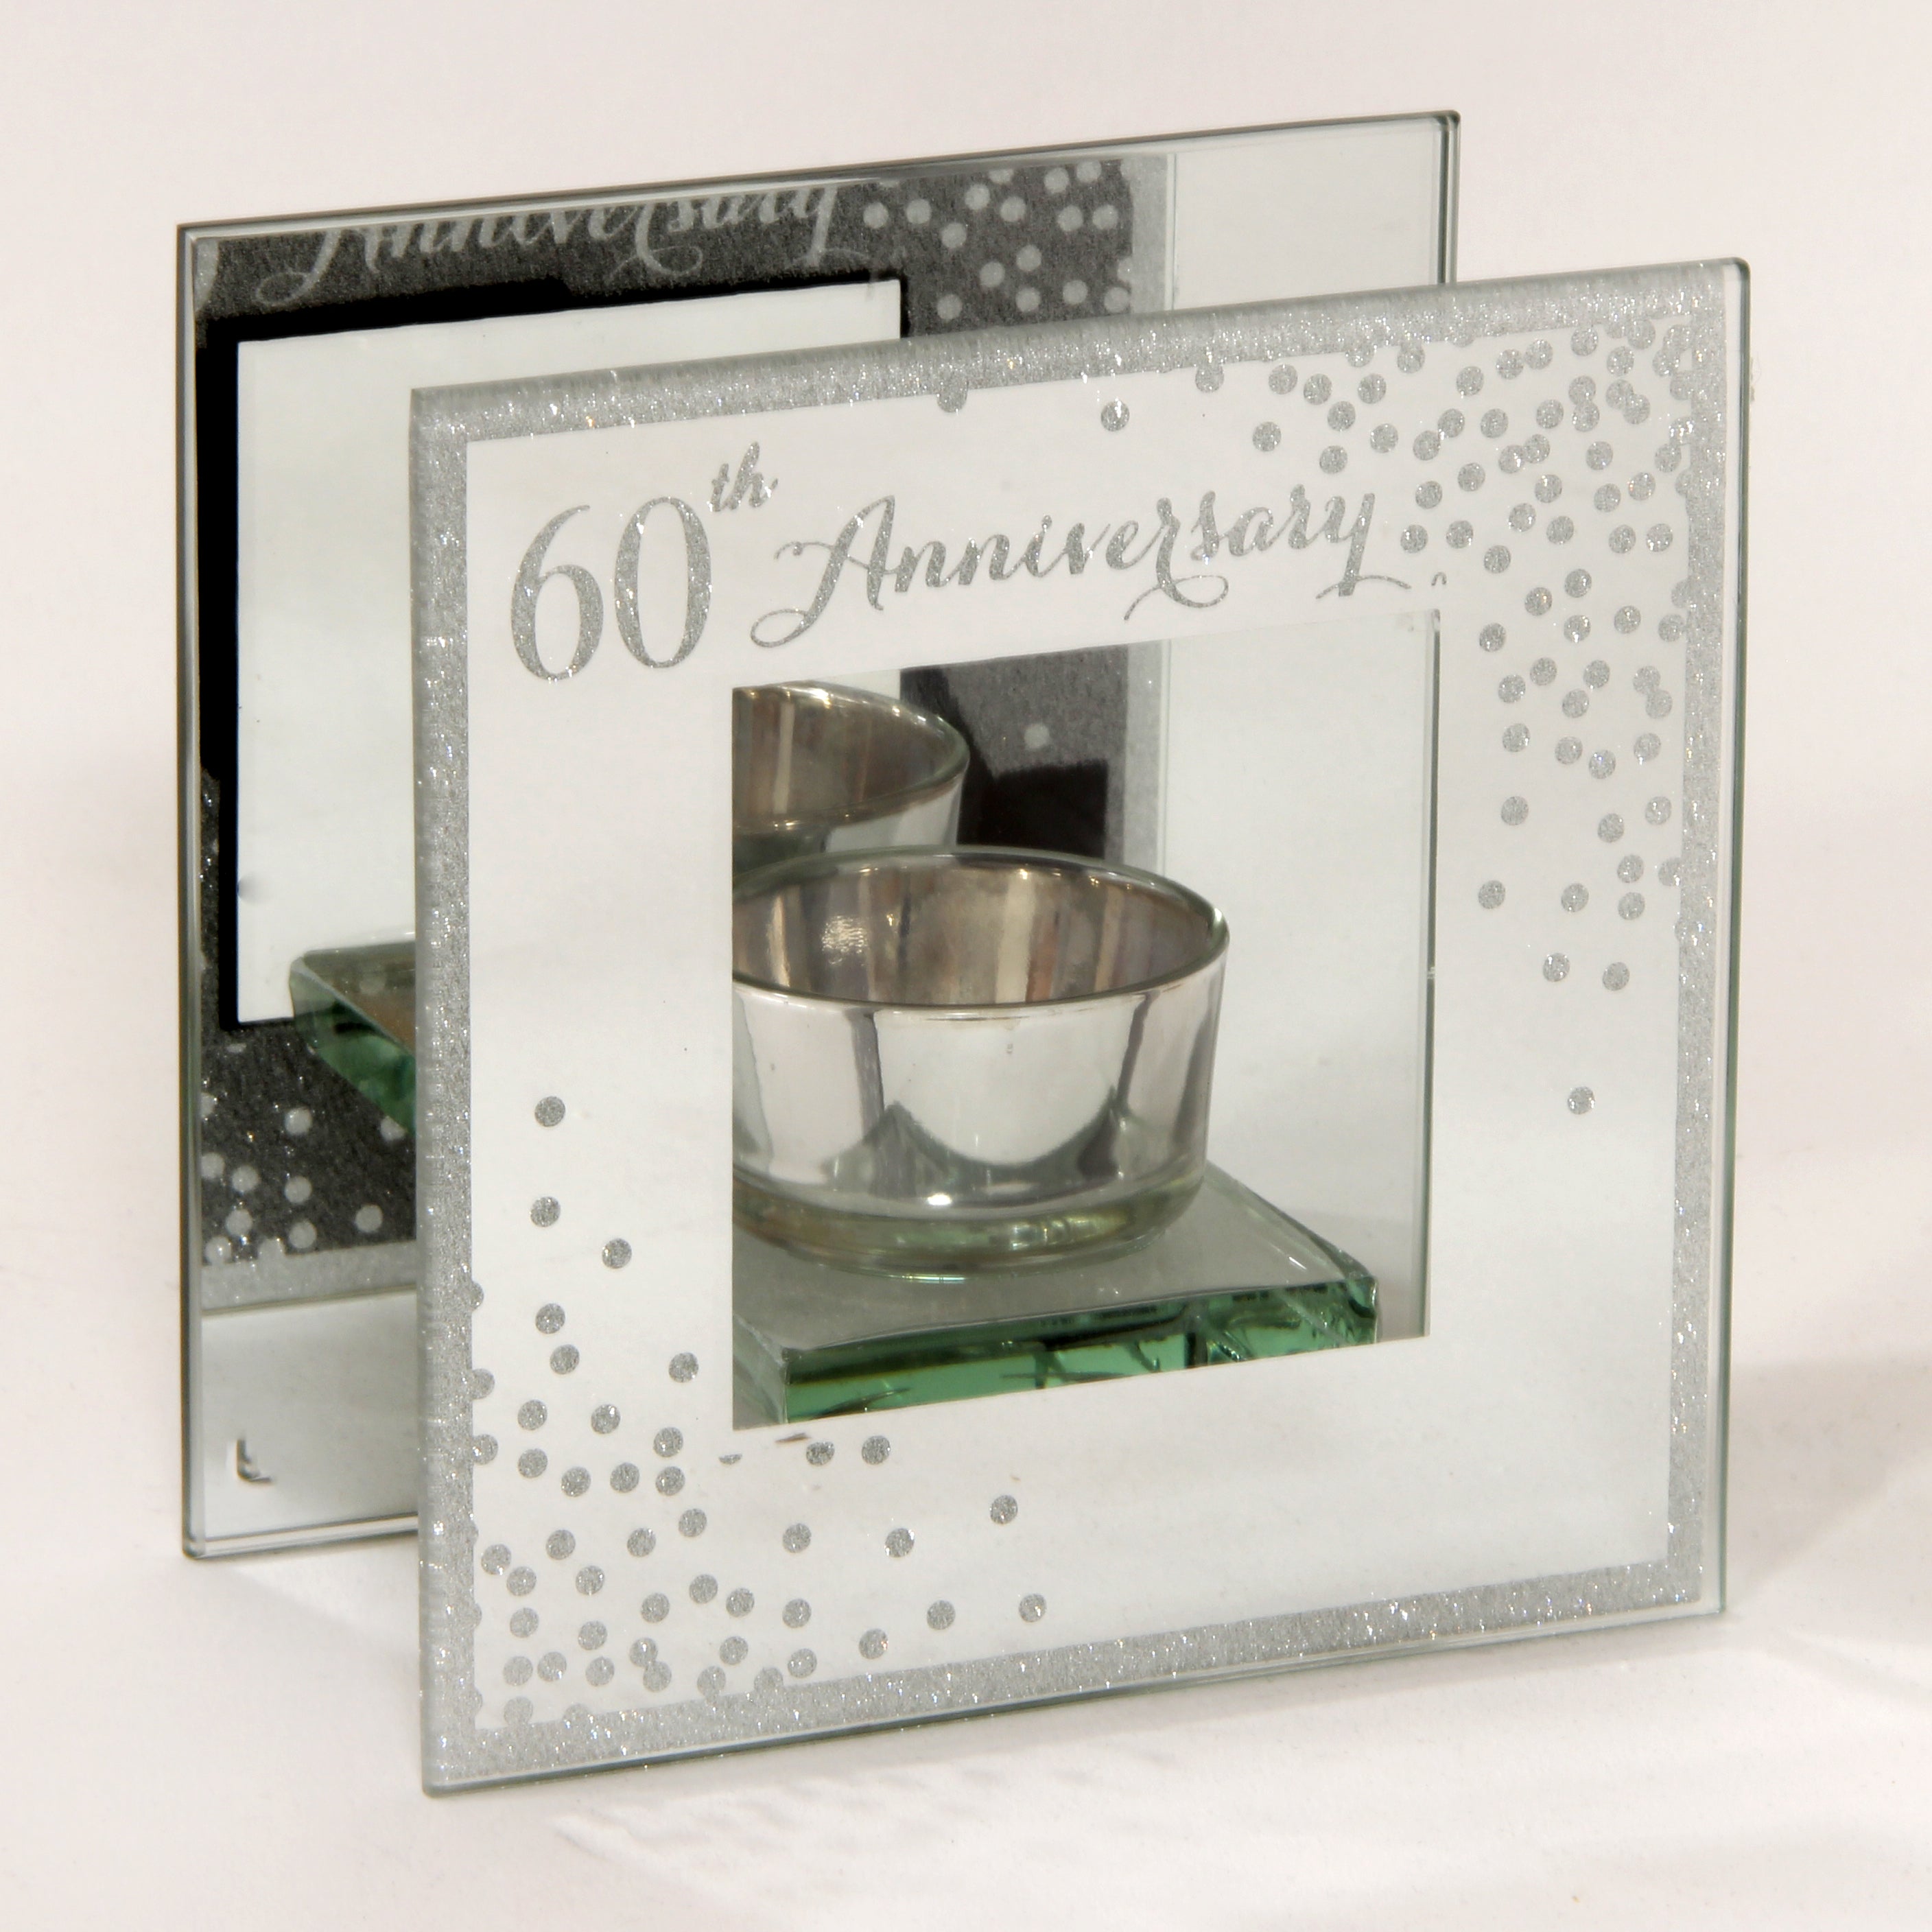 60th Anniversary Candle Holder - 4" X 6" Mirrored Glitter Sparkle